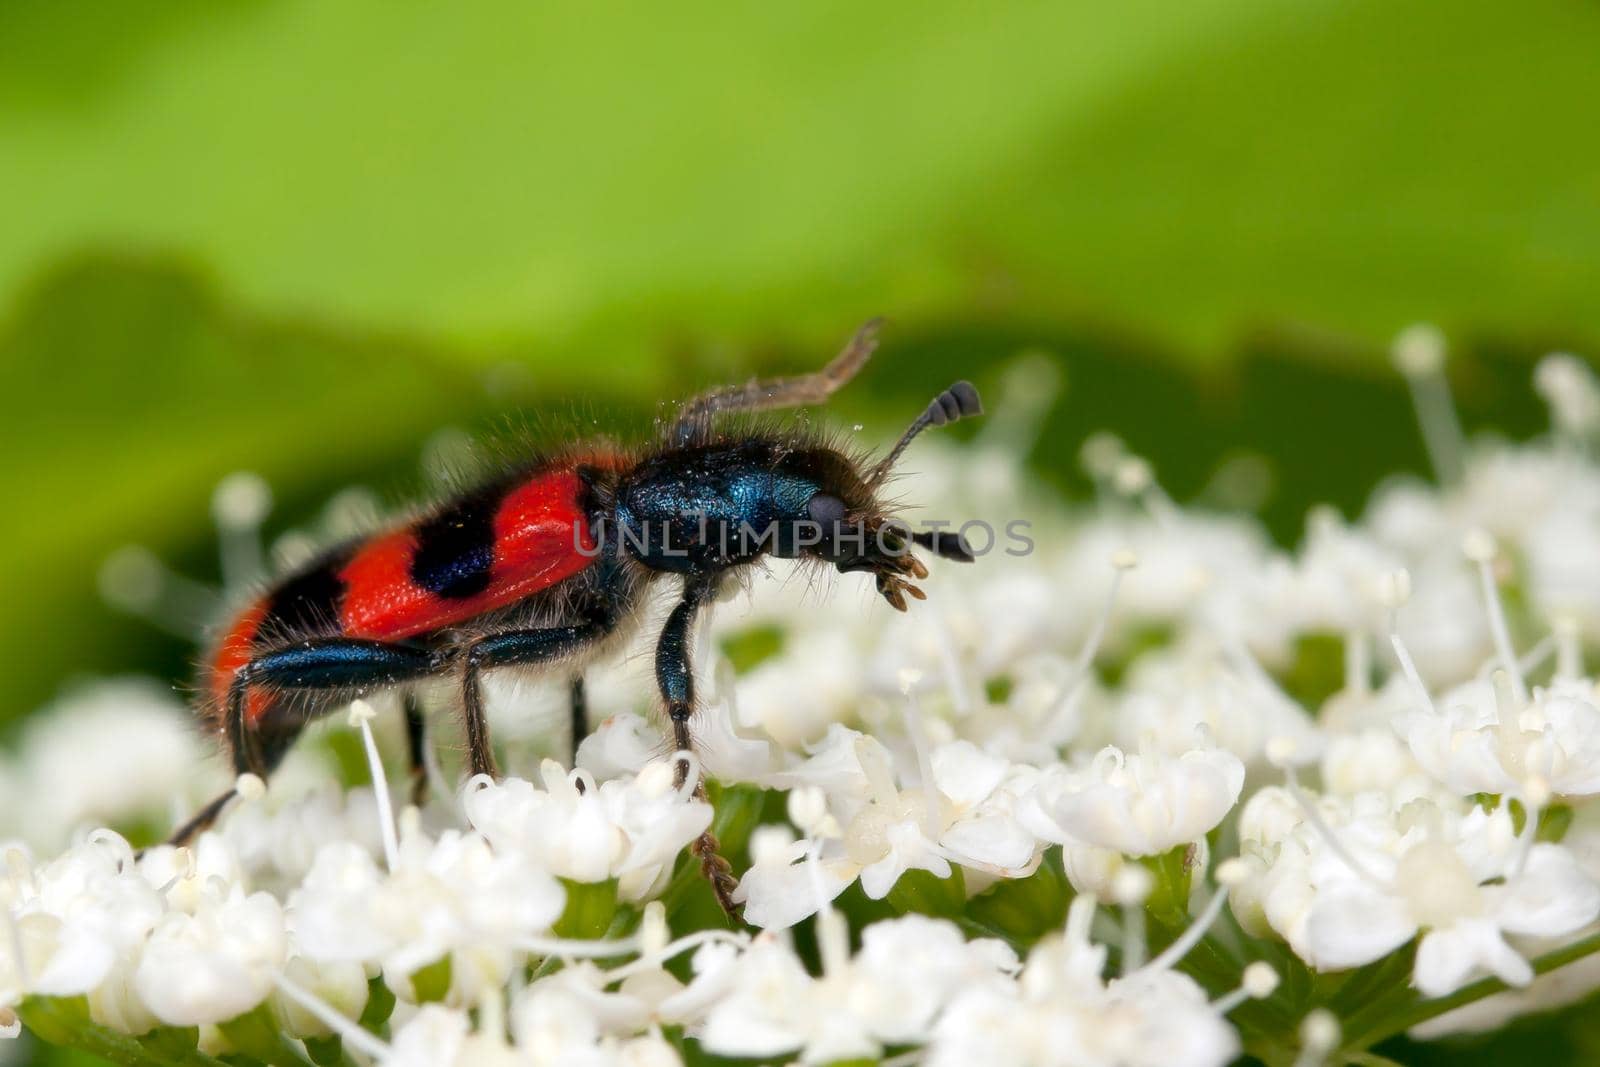 Checkered hairy beetle climbs on a white flowers
